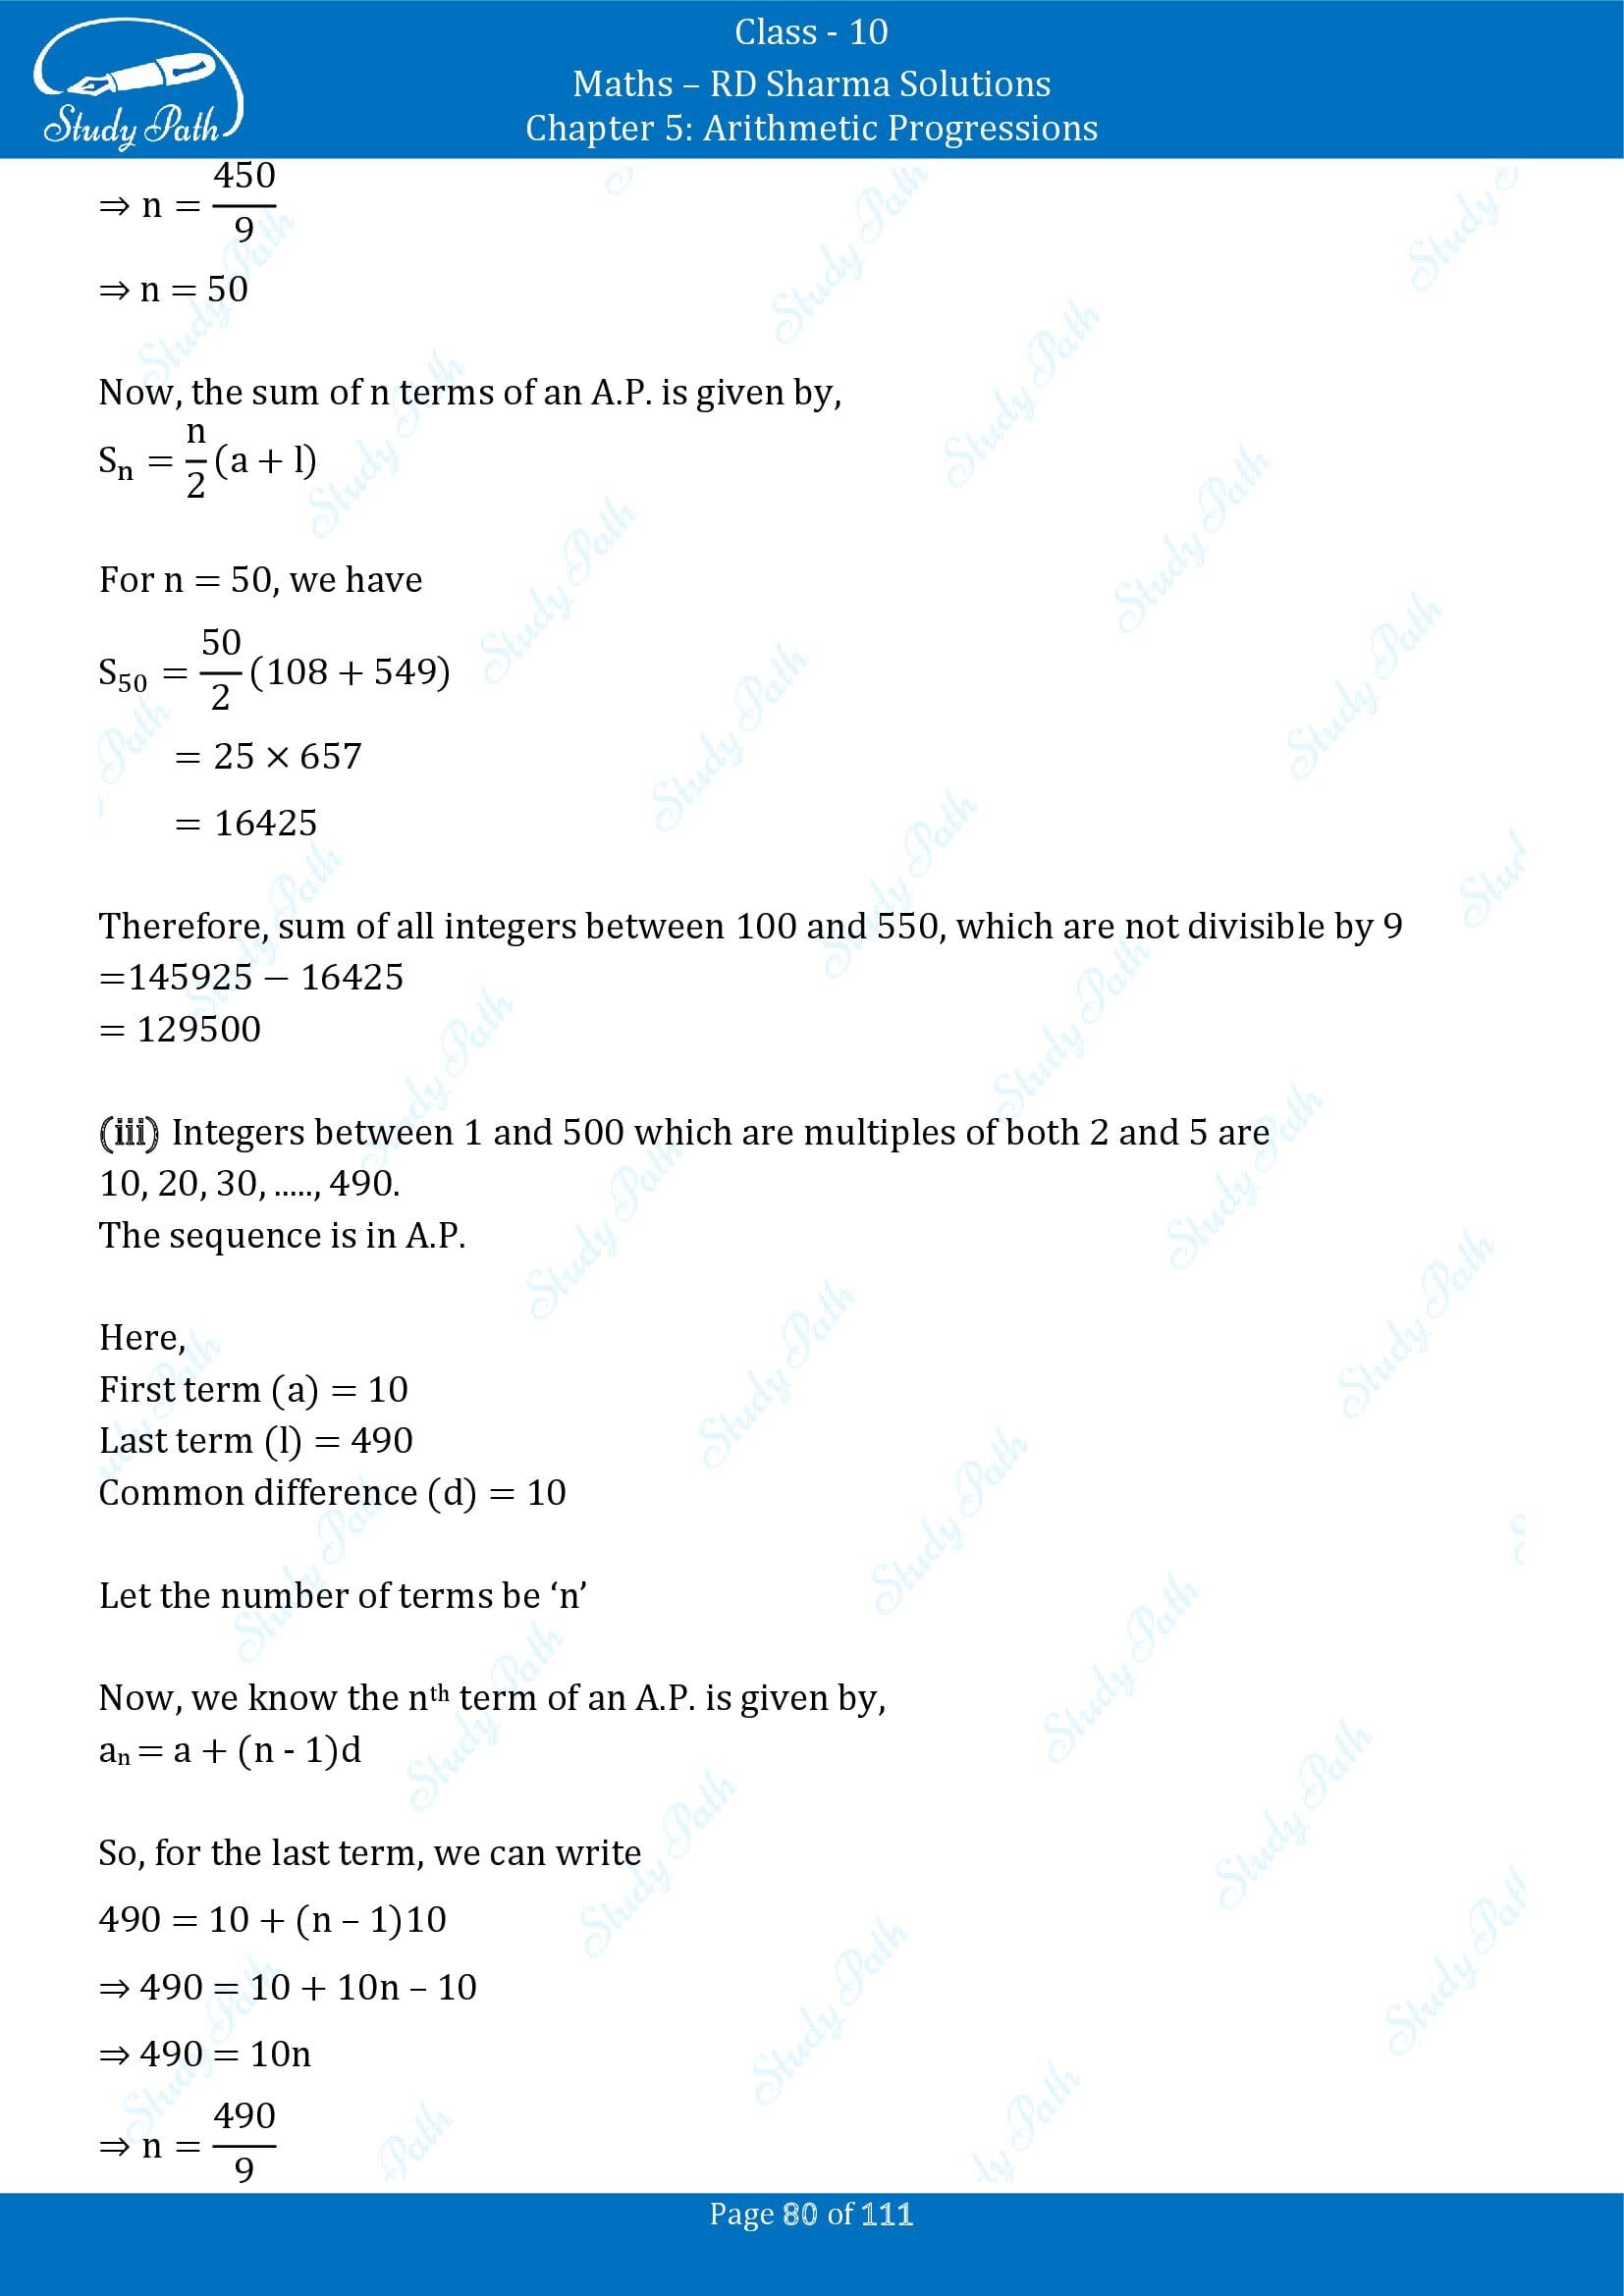 RD Sharma Solutions Class 10 Chapter 5 Arithmetic Progressions Exercise 5.6 00080